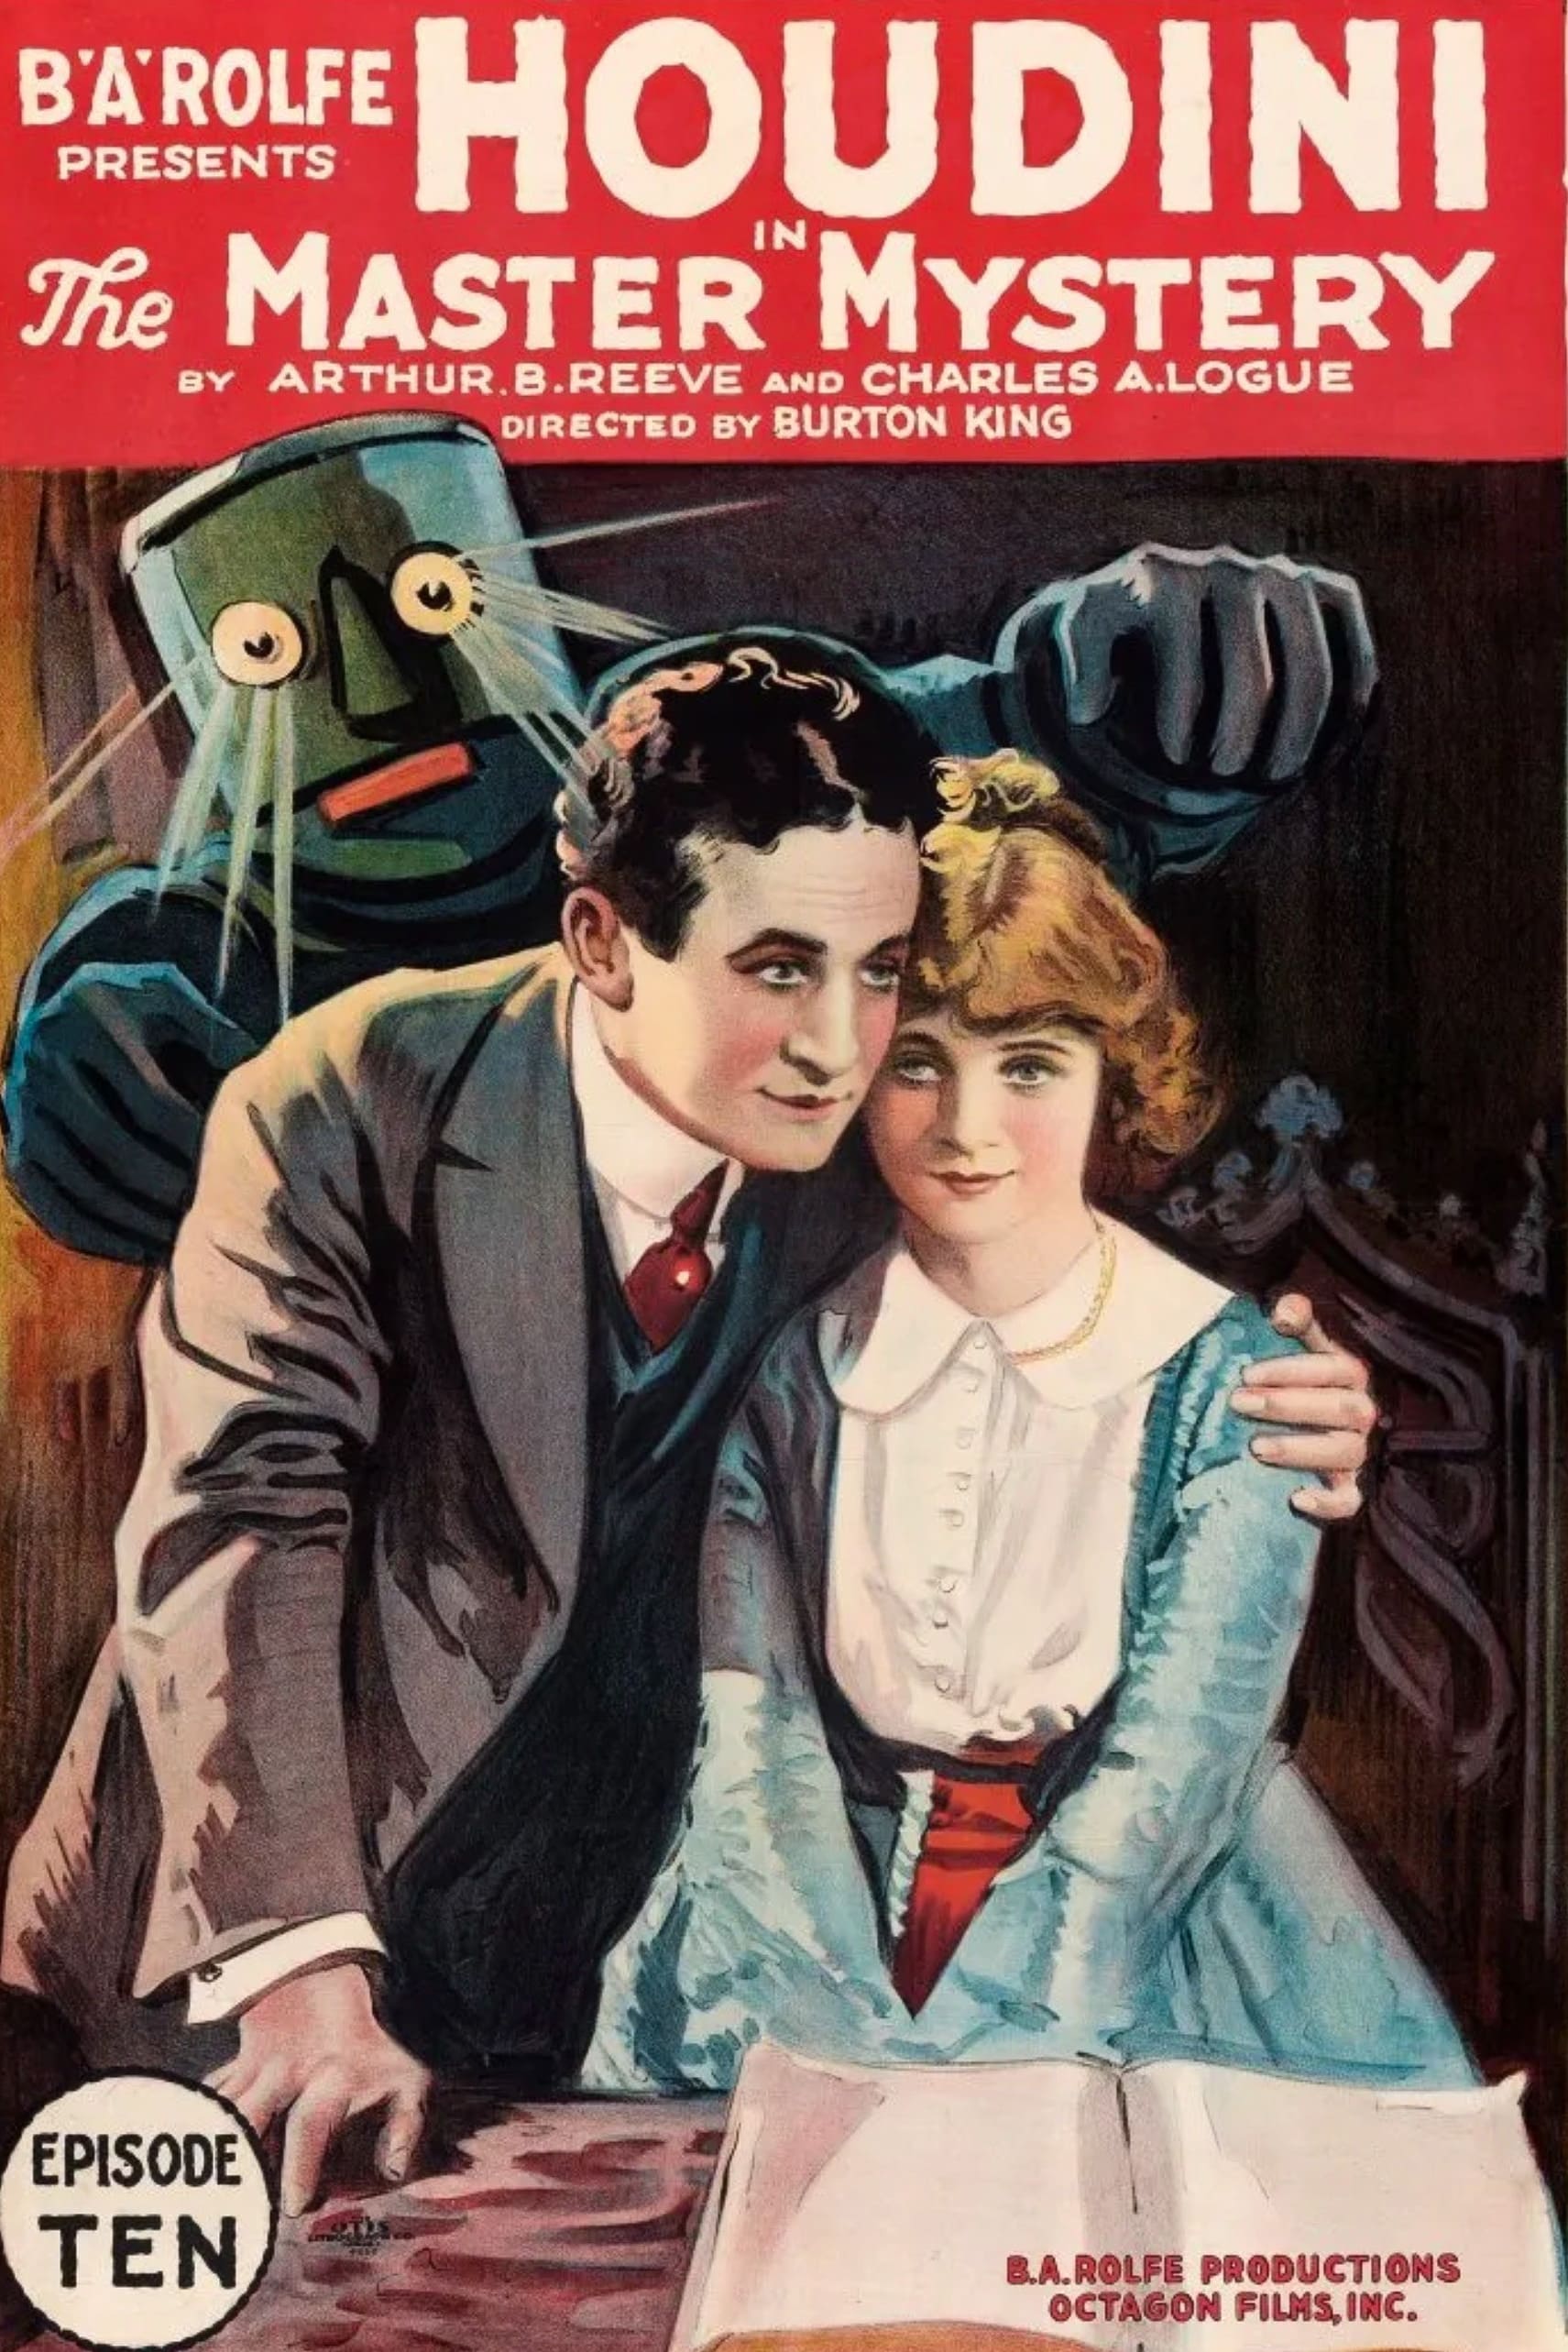 The Master Mystery (1918)